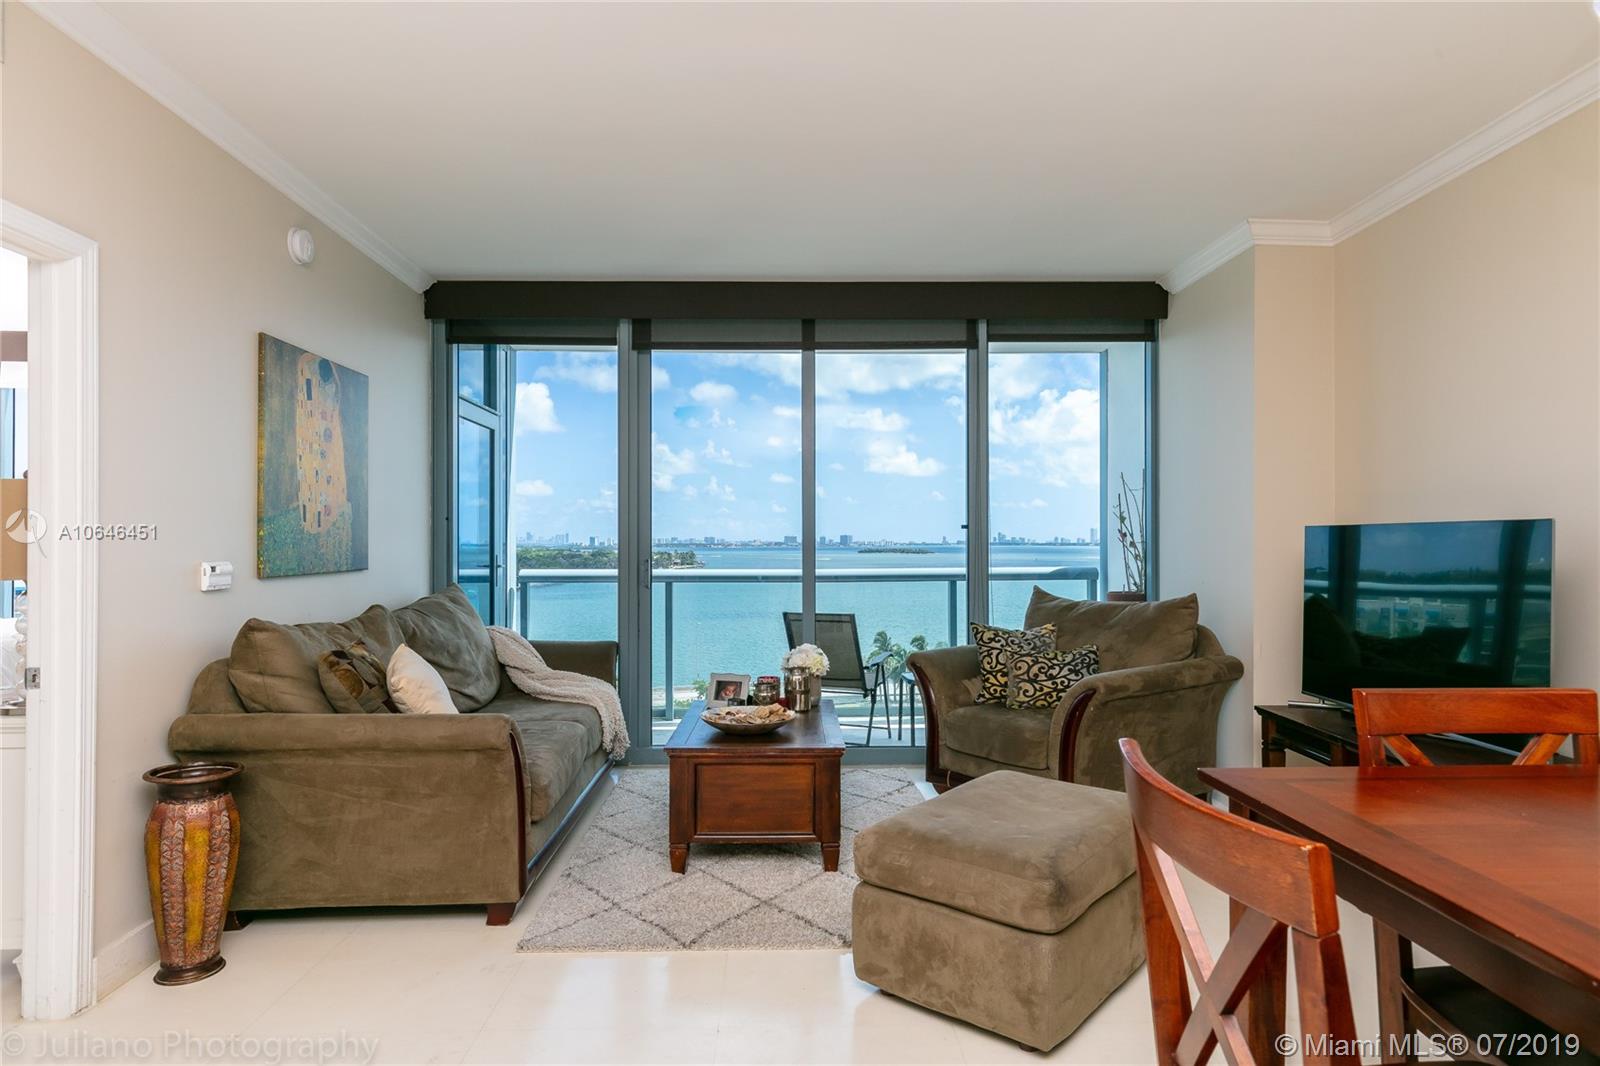 Living/Family room area with views!